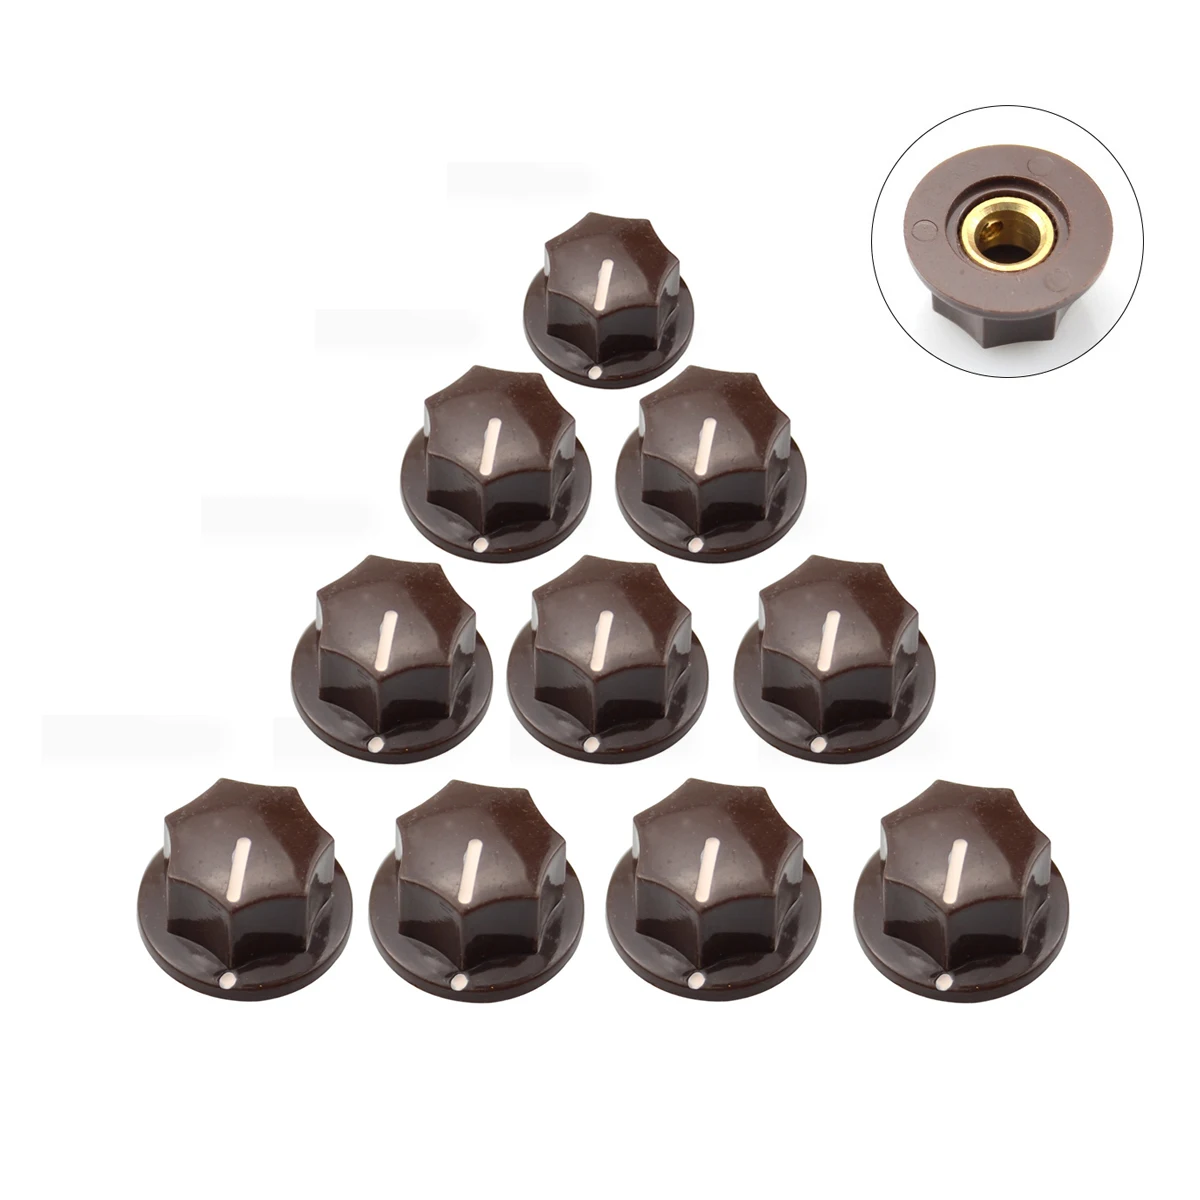 10 pcs x Small Size Guitar Knob MXR Style Skirted AMP Knob Effects Pedal Knobs Brass Insert Guitar Accessories enlarge